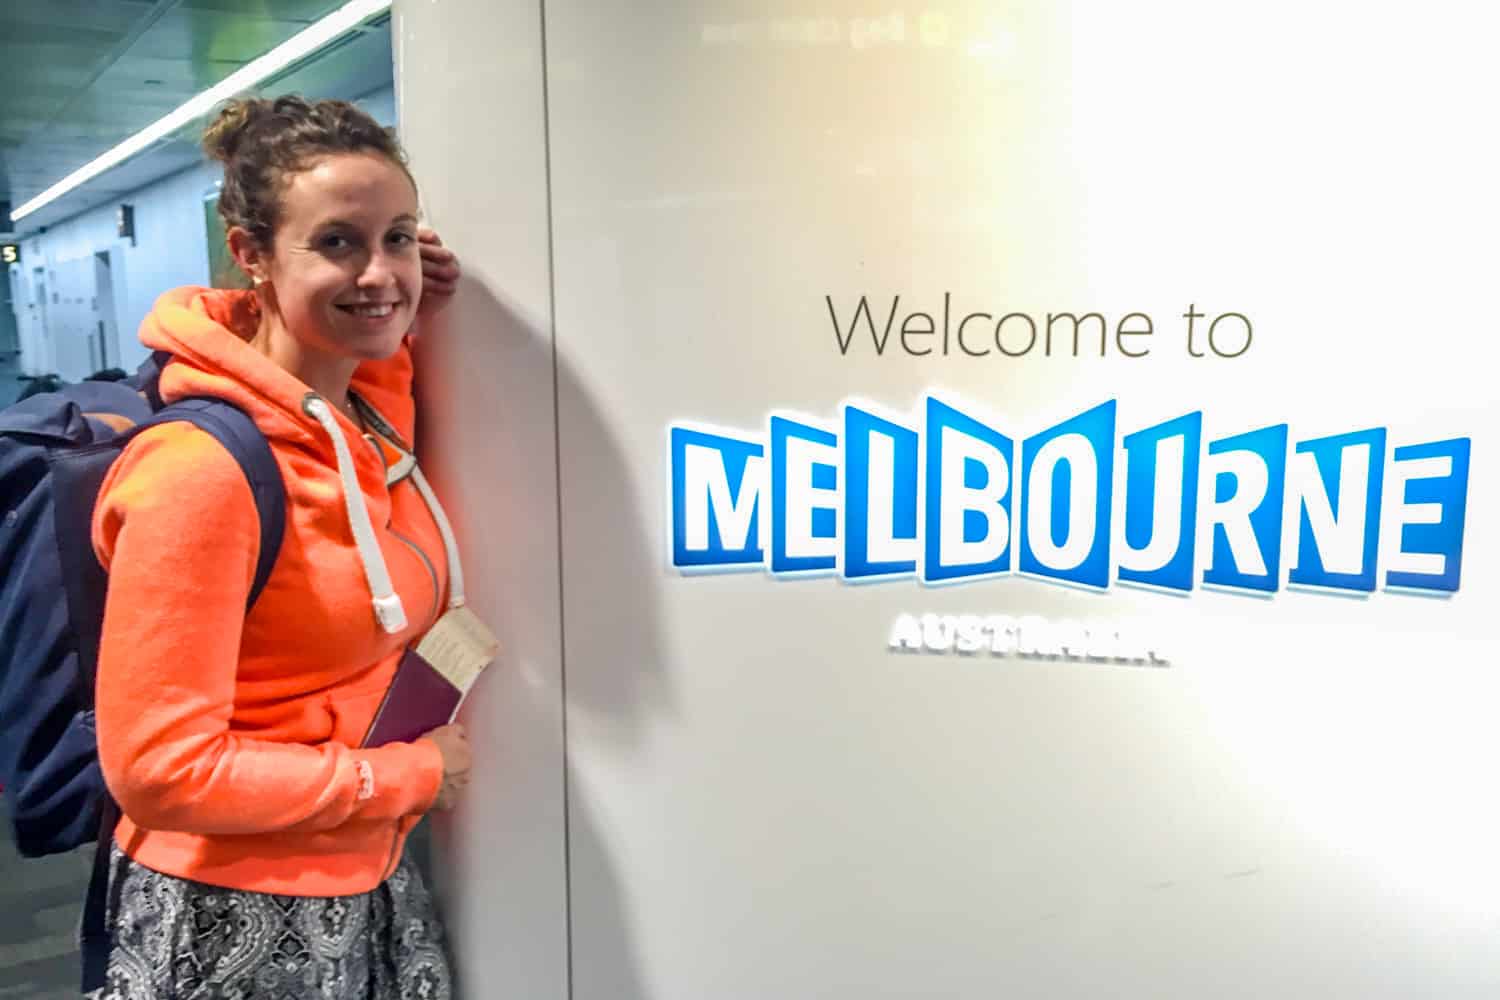 A woman in a bright orange top and black and white pants stands next to an airport arrival sign that says "Welcome to Melbourne Australia".